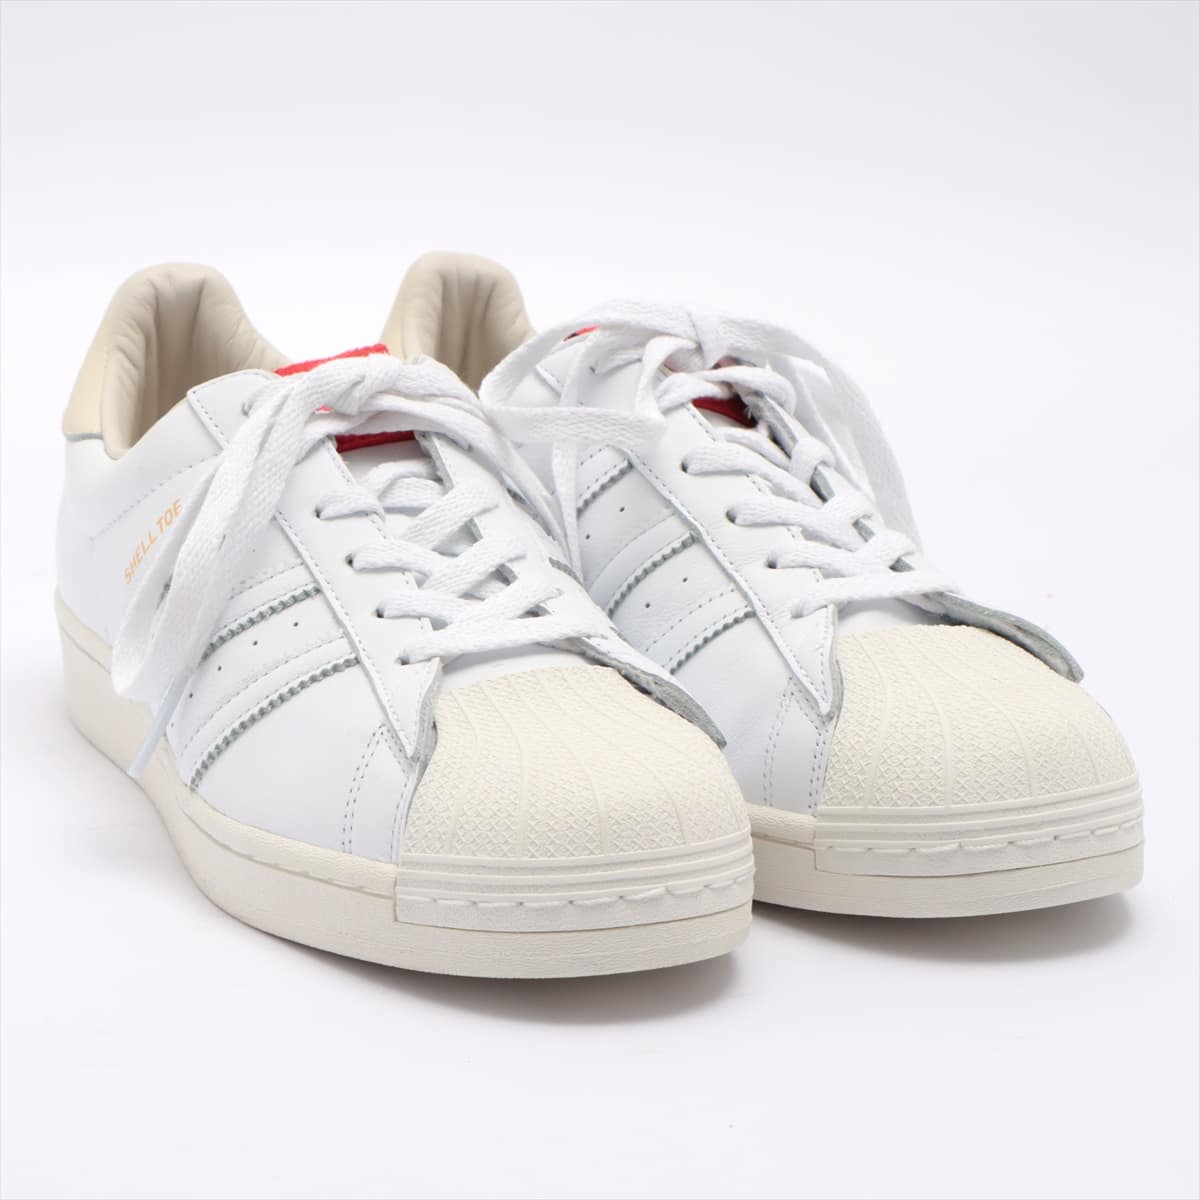 Adidas superstars Leather Sneakers 28.5cm Men's White 424 collaboration SHELL TOE